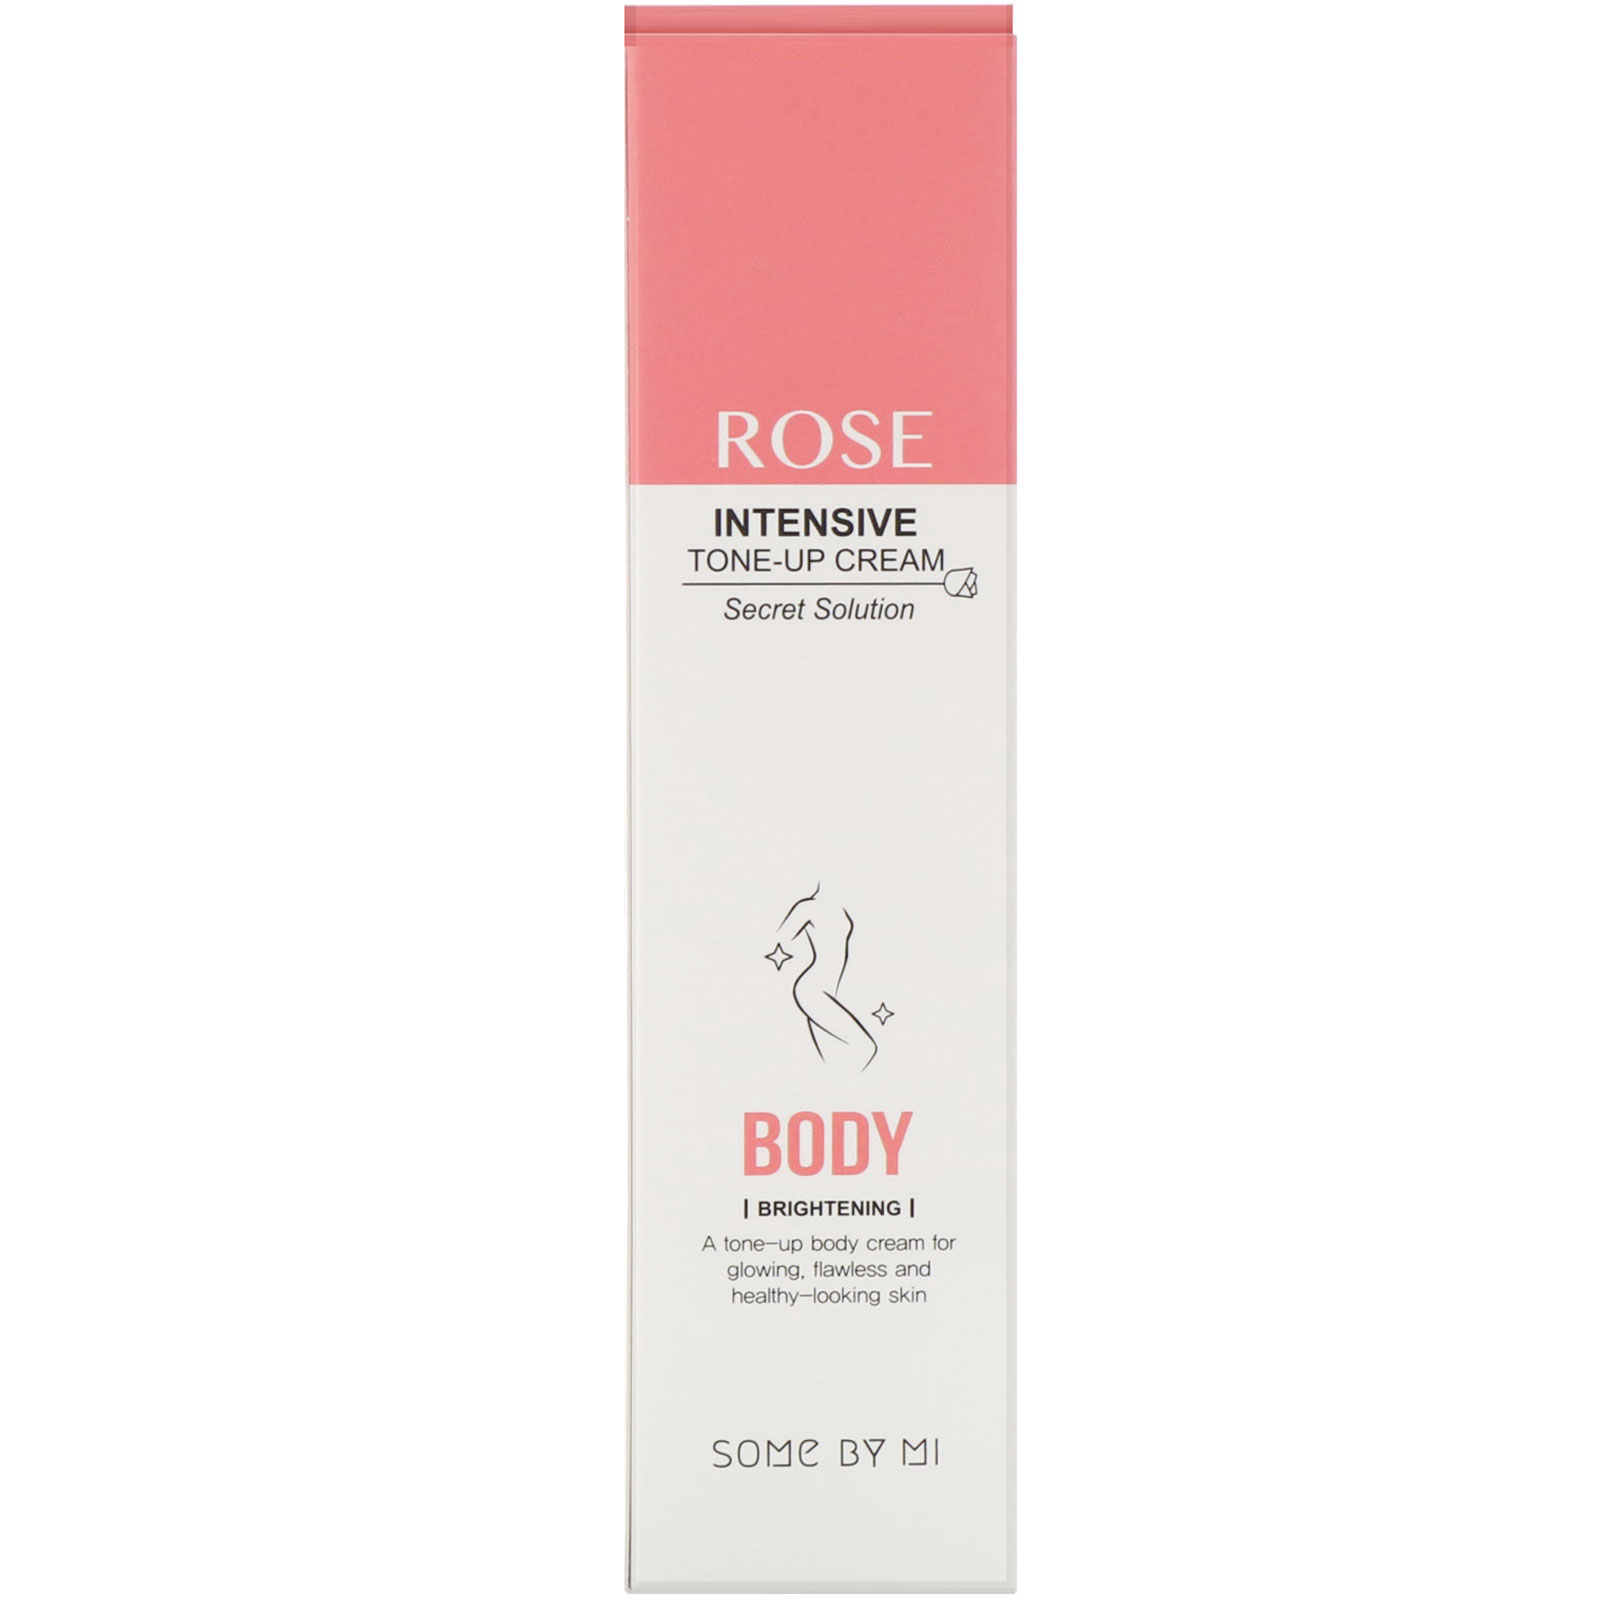 Some by mi Rose Intensive Tone-up Cream.